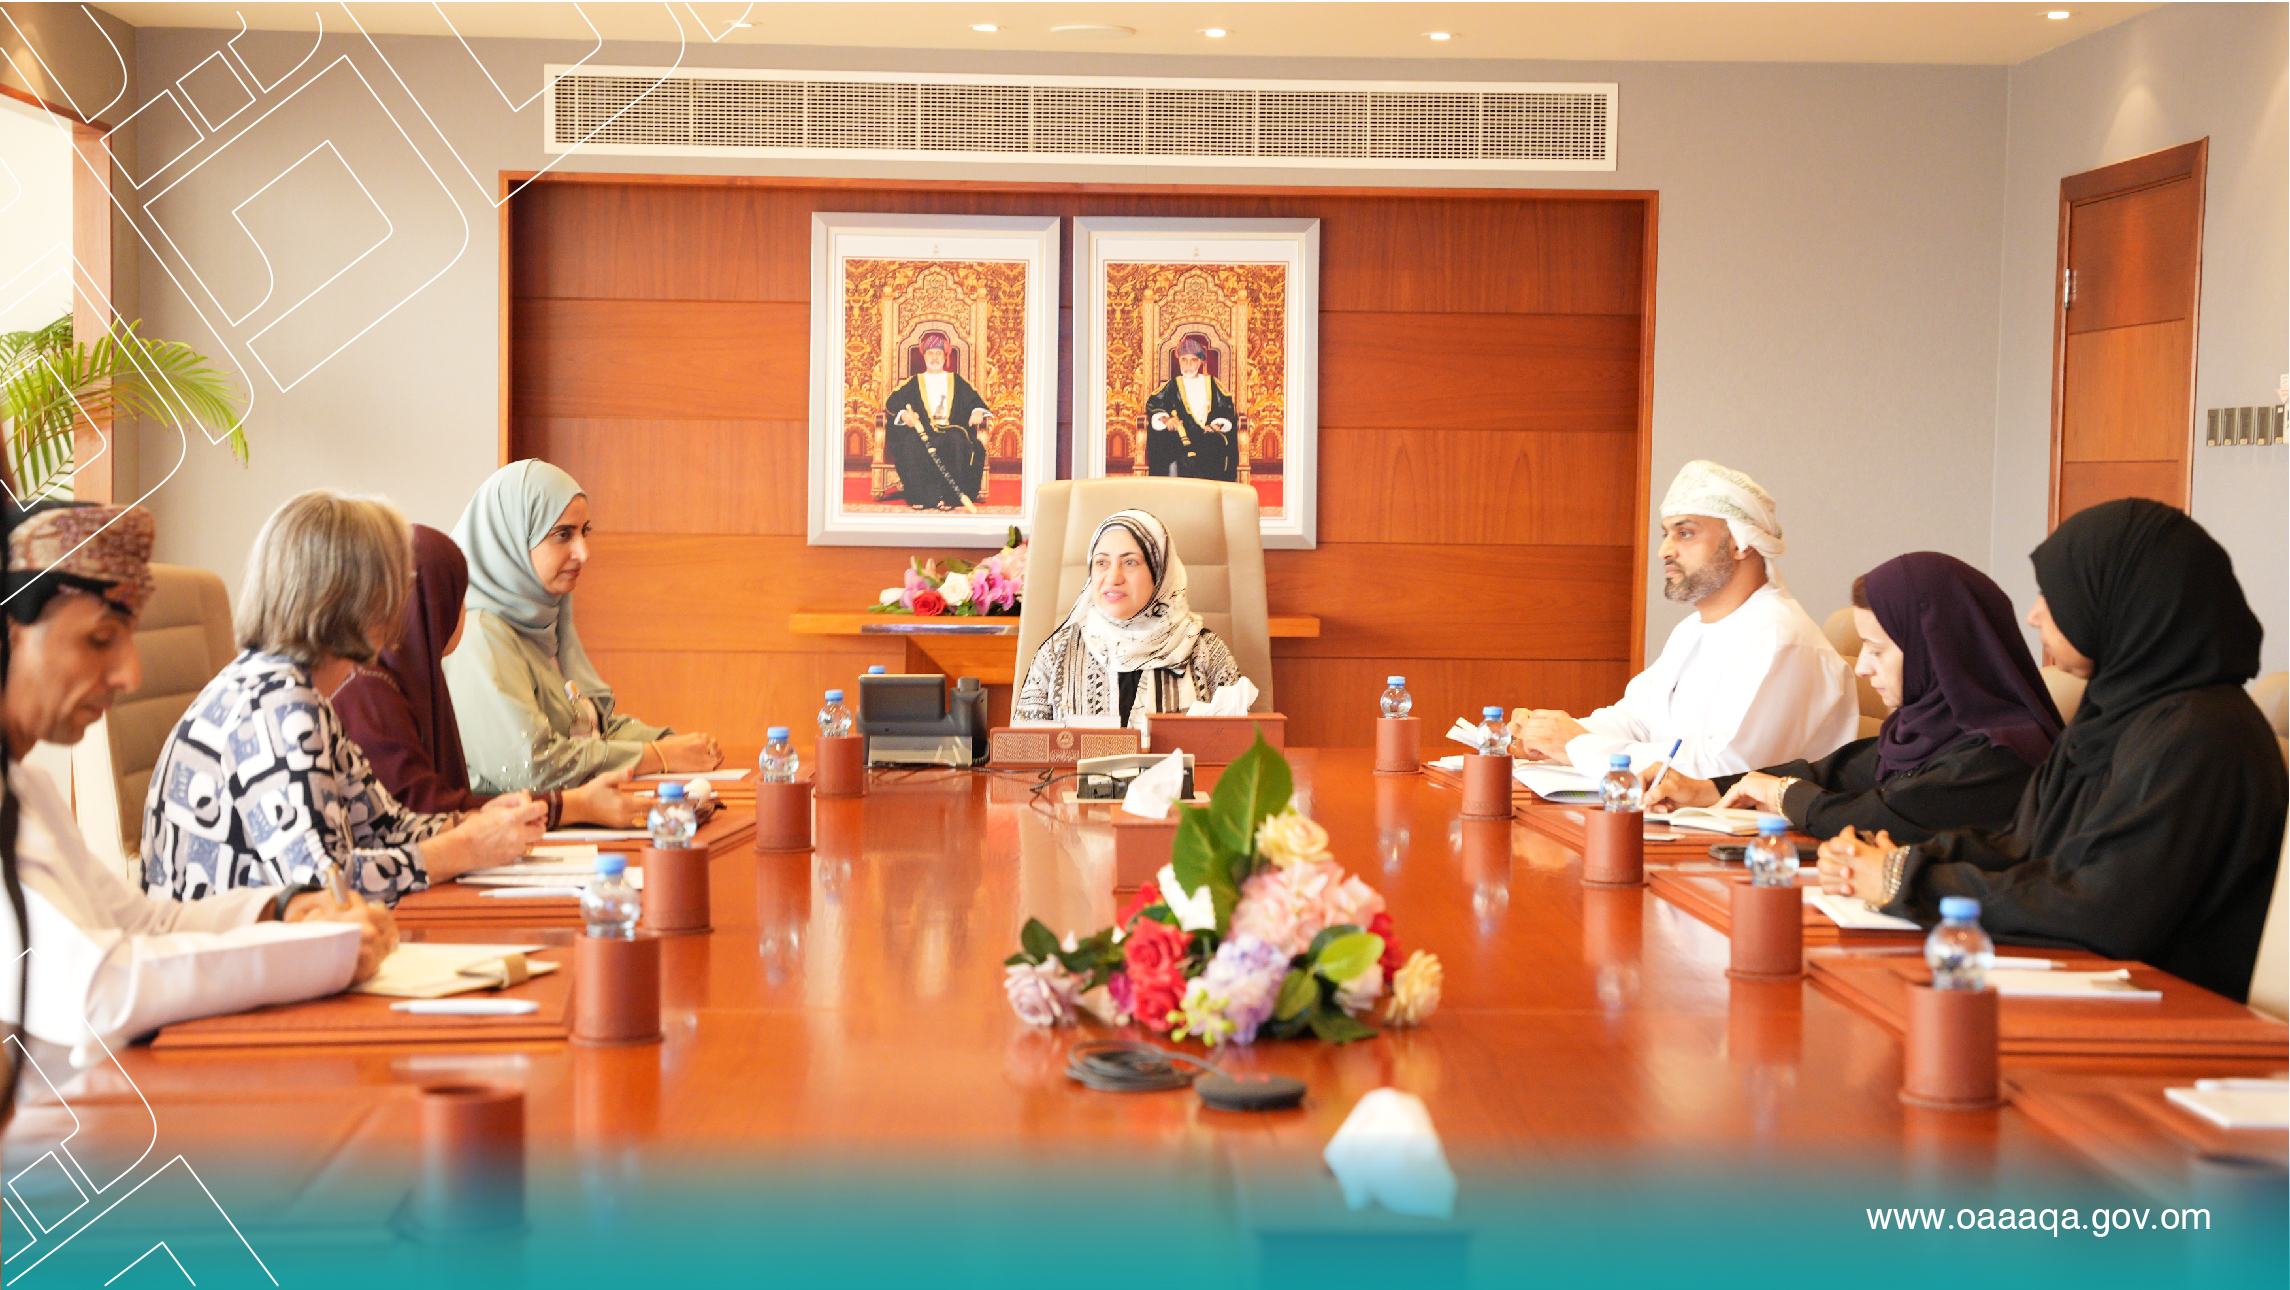 Discussion of the relationship between licensing of Academic programmes and Listing of qualifications on the Oman Qualifications Framework 